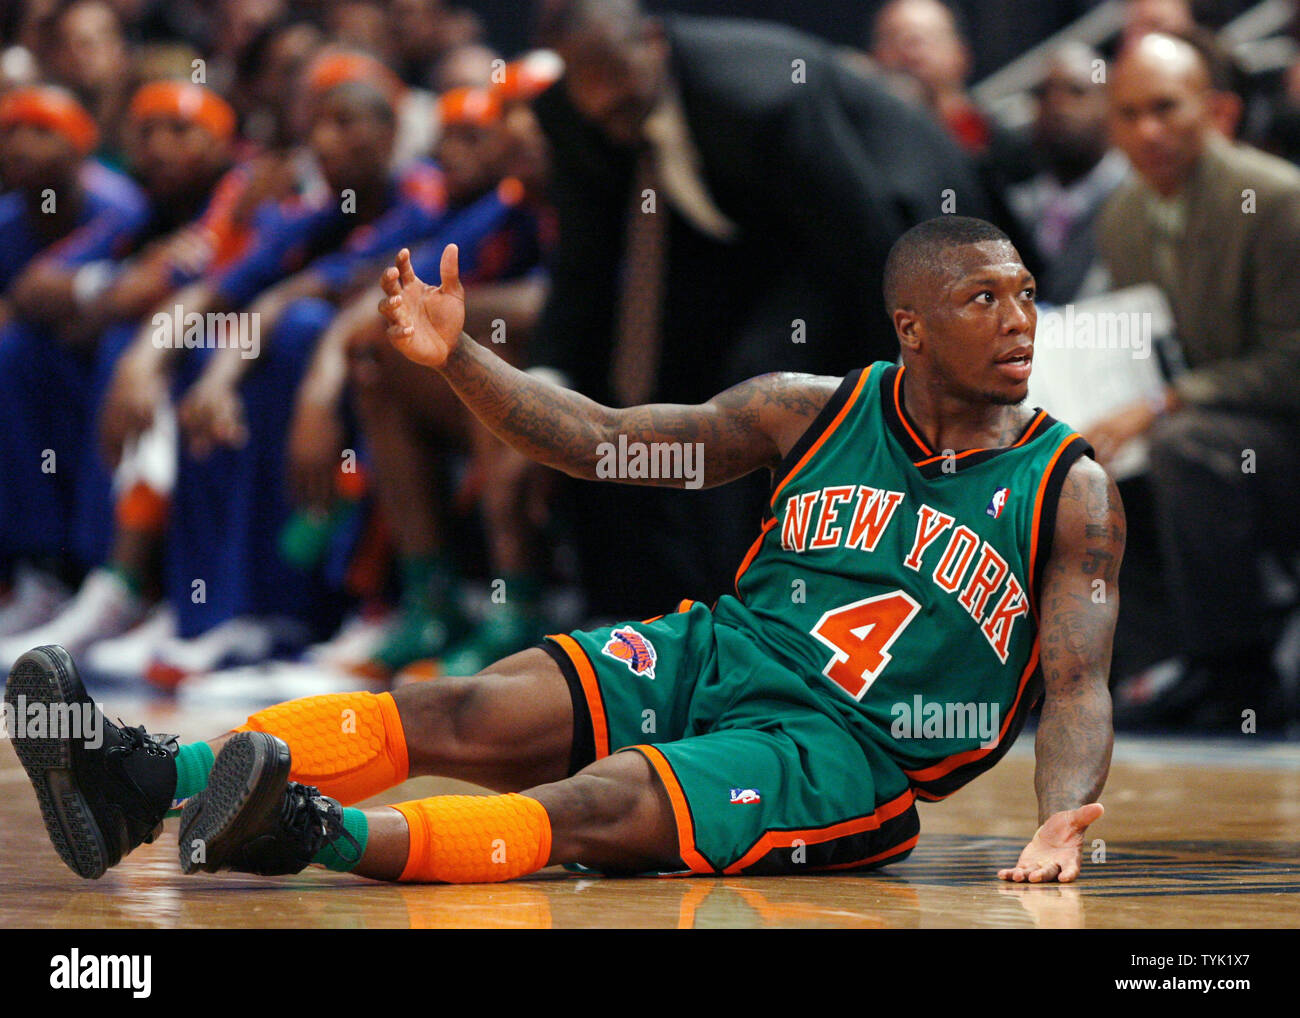 New York Knicks Nate Robinson reacts on the floor in the fourth quarter  against the New Jersey Nets at Madison Square Garden in New York City on  March 18, 2009. The Nets